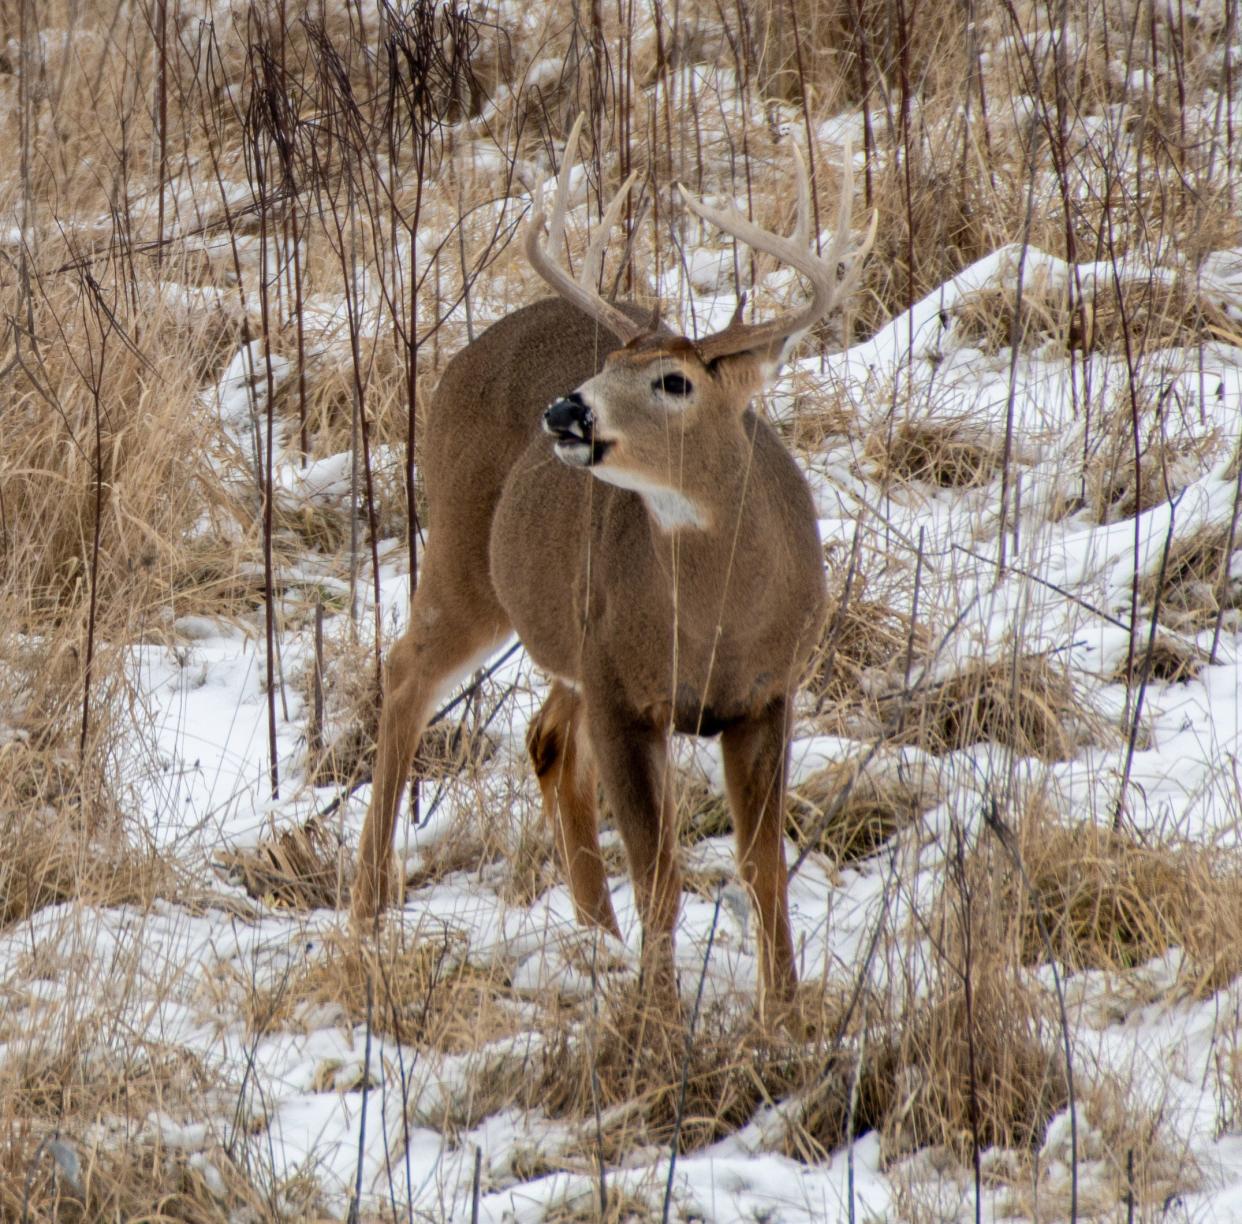 Ohio's deer harvest this past season was the highest in a decade.